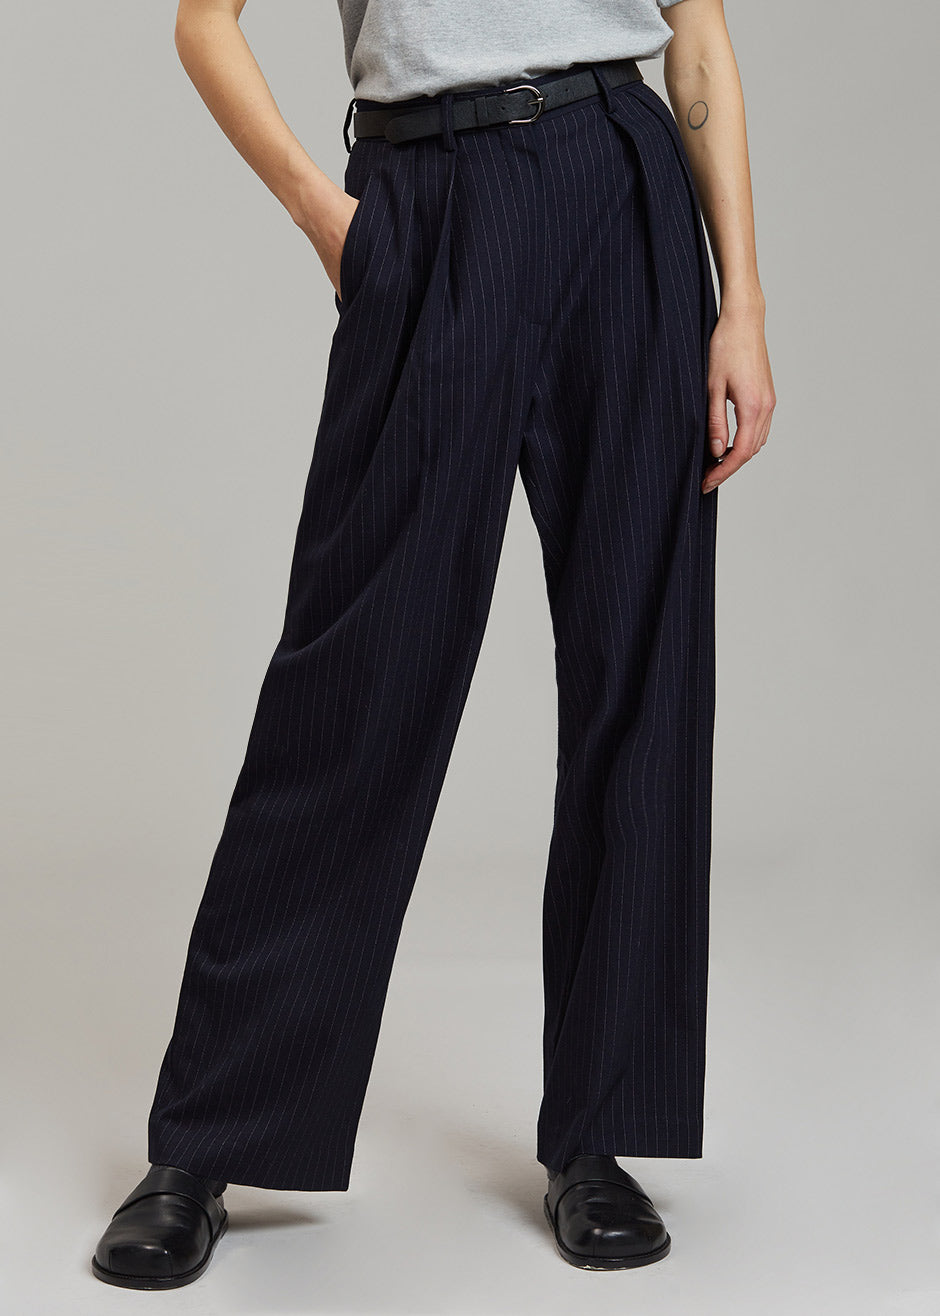 Royal blue striped linen high waisted pleated lightweight Trousers |  Sumissura